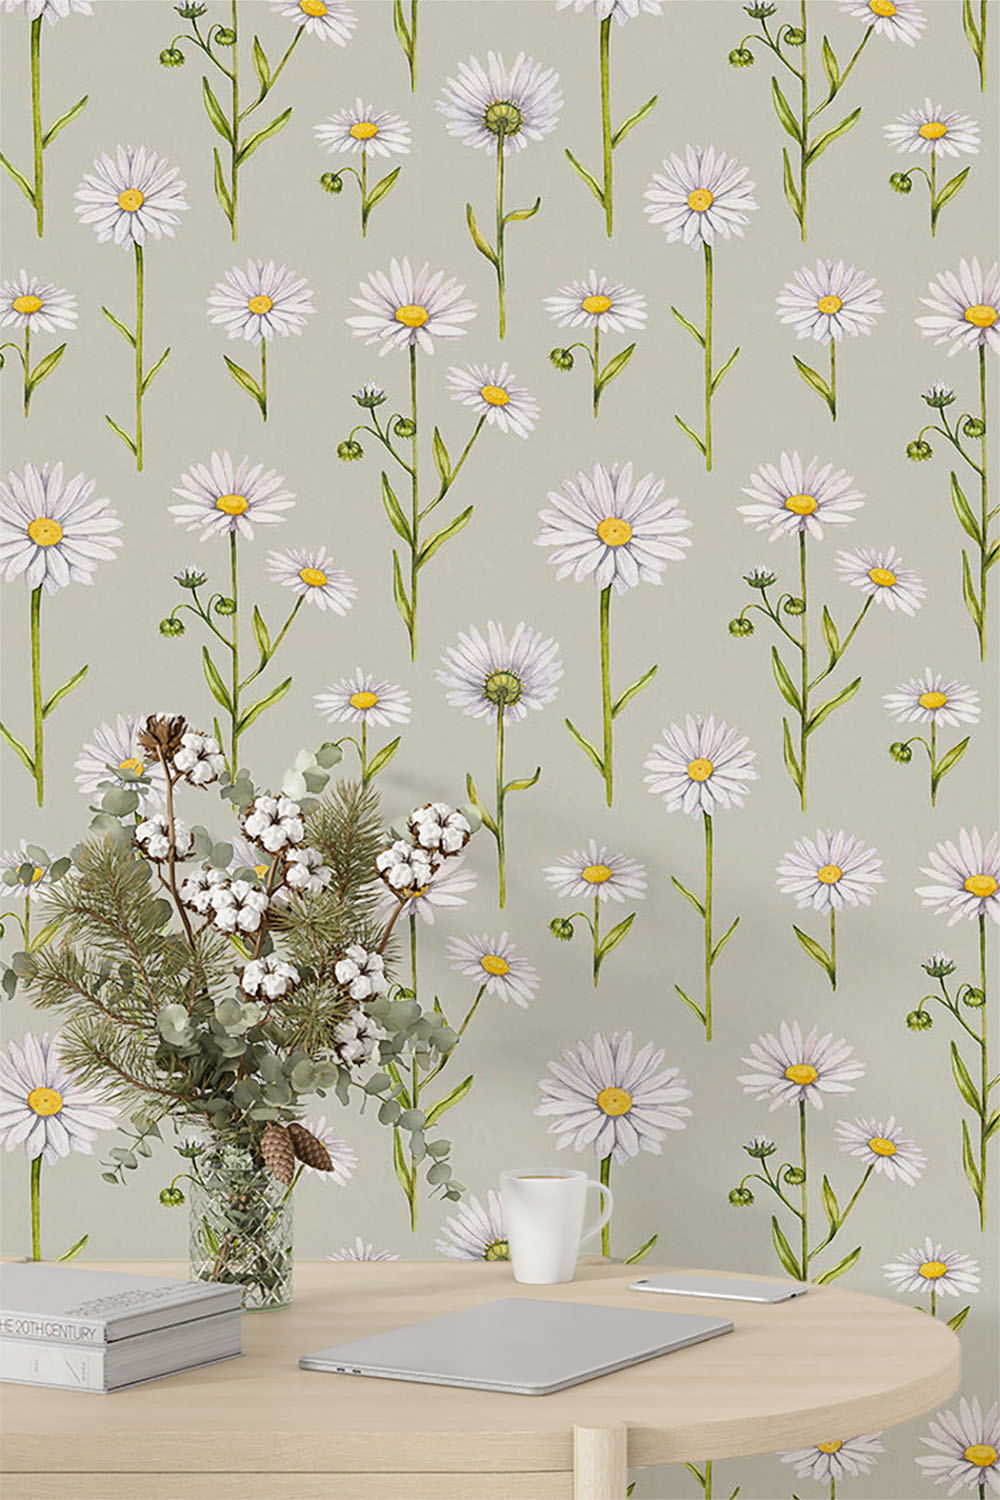 daisy-flower-with-stem-and-leaf-wallpaper-sample